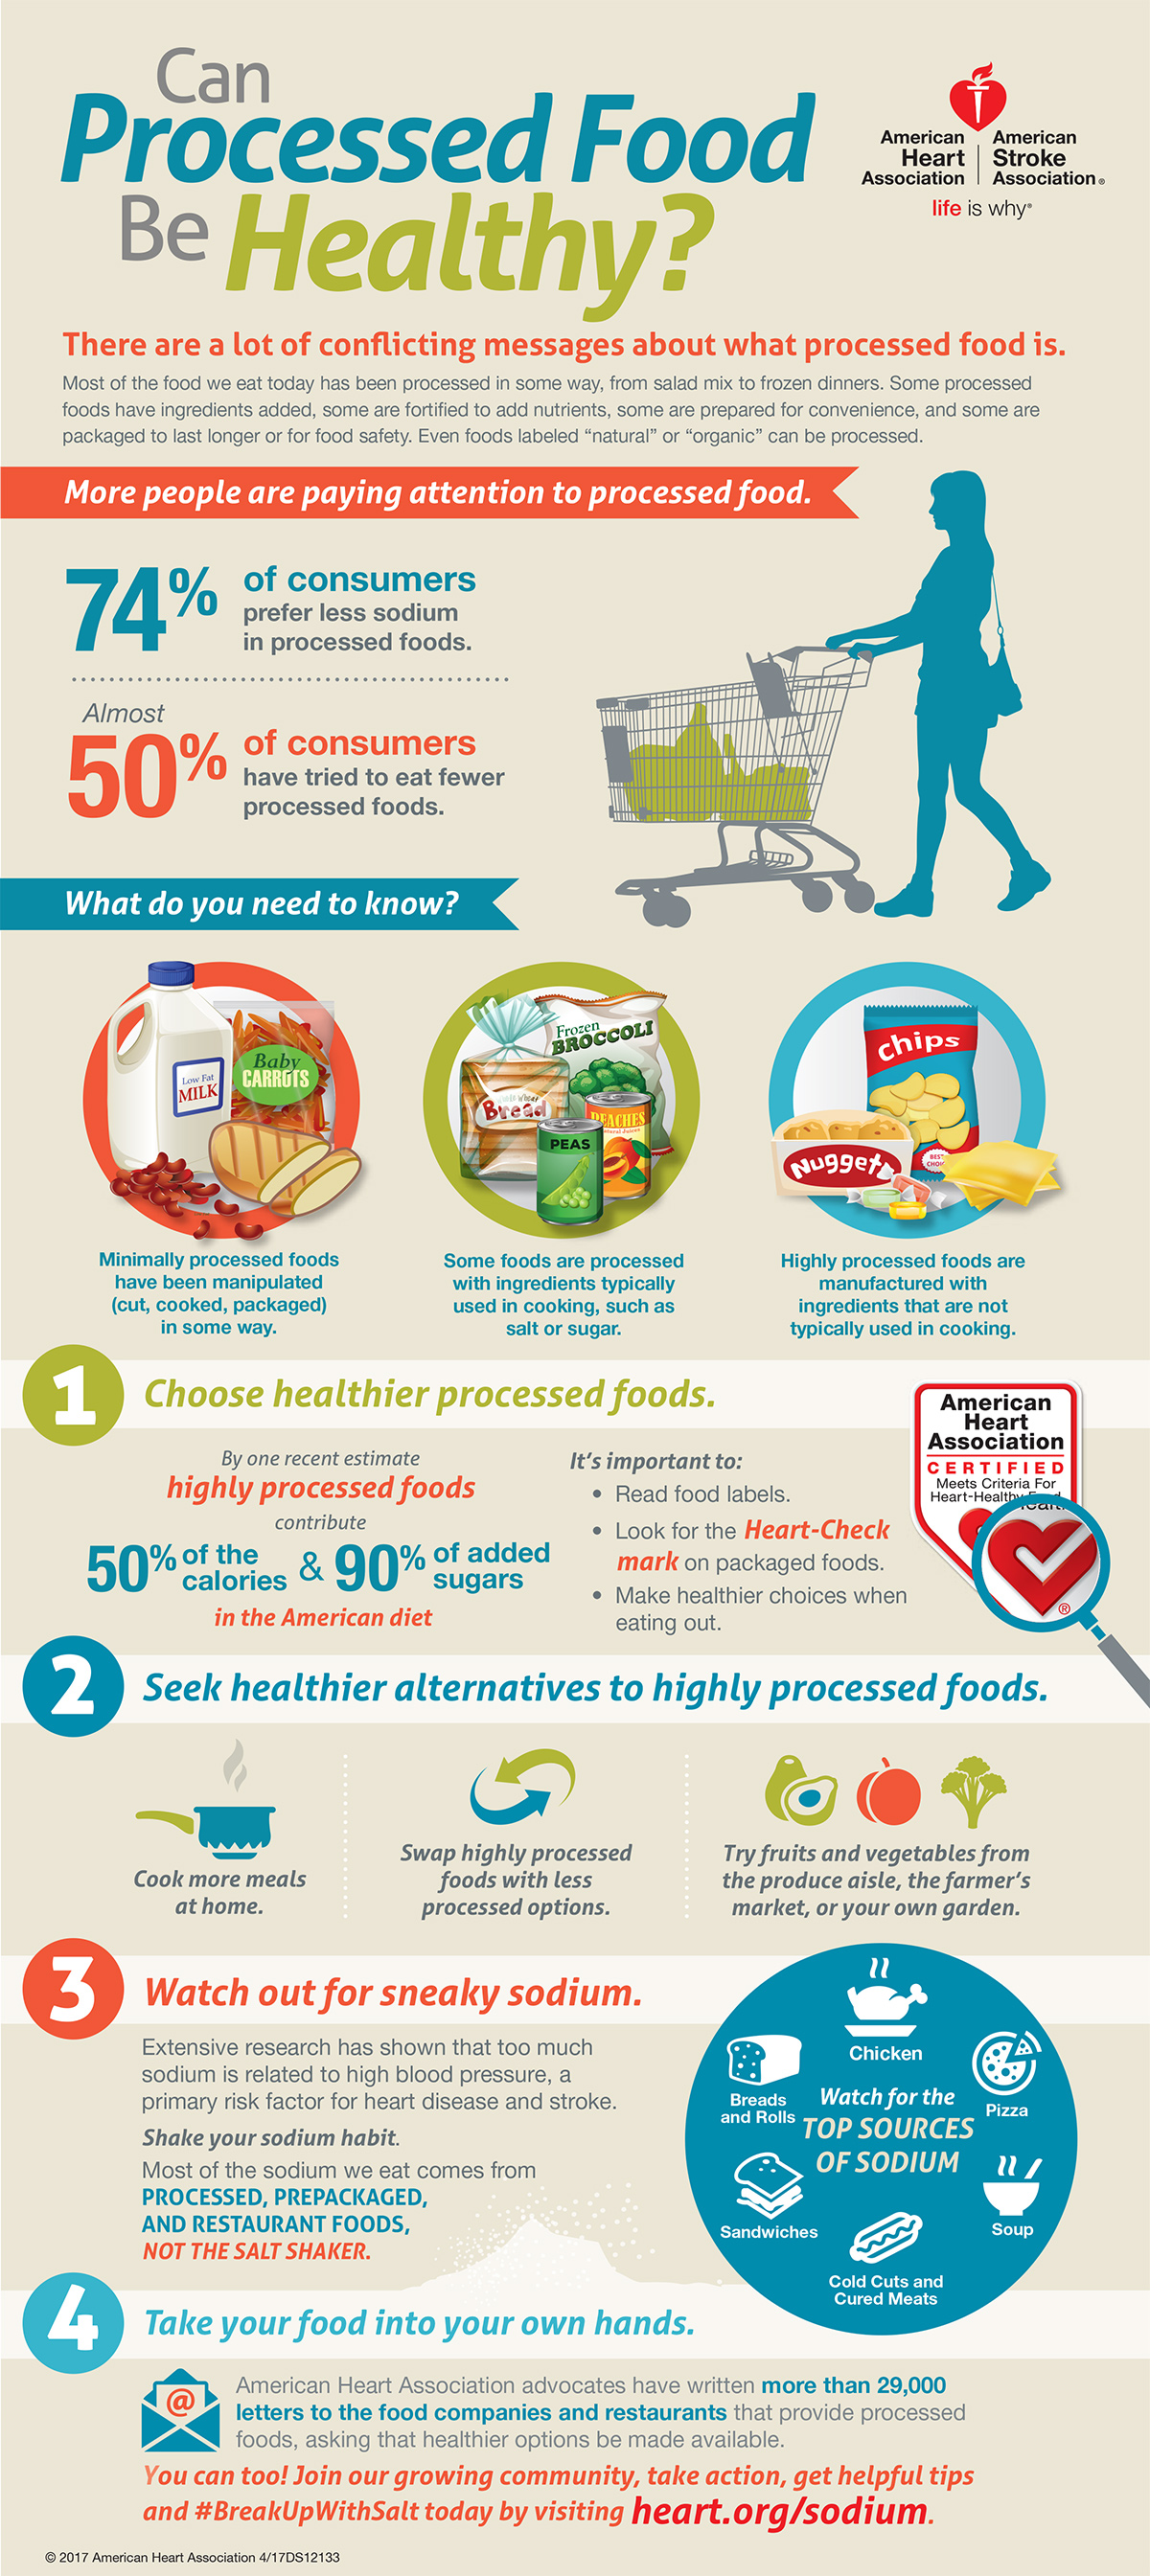 Processed-food-infographic-1200w.jpg